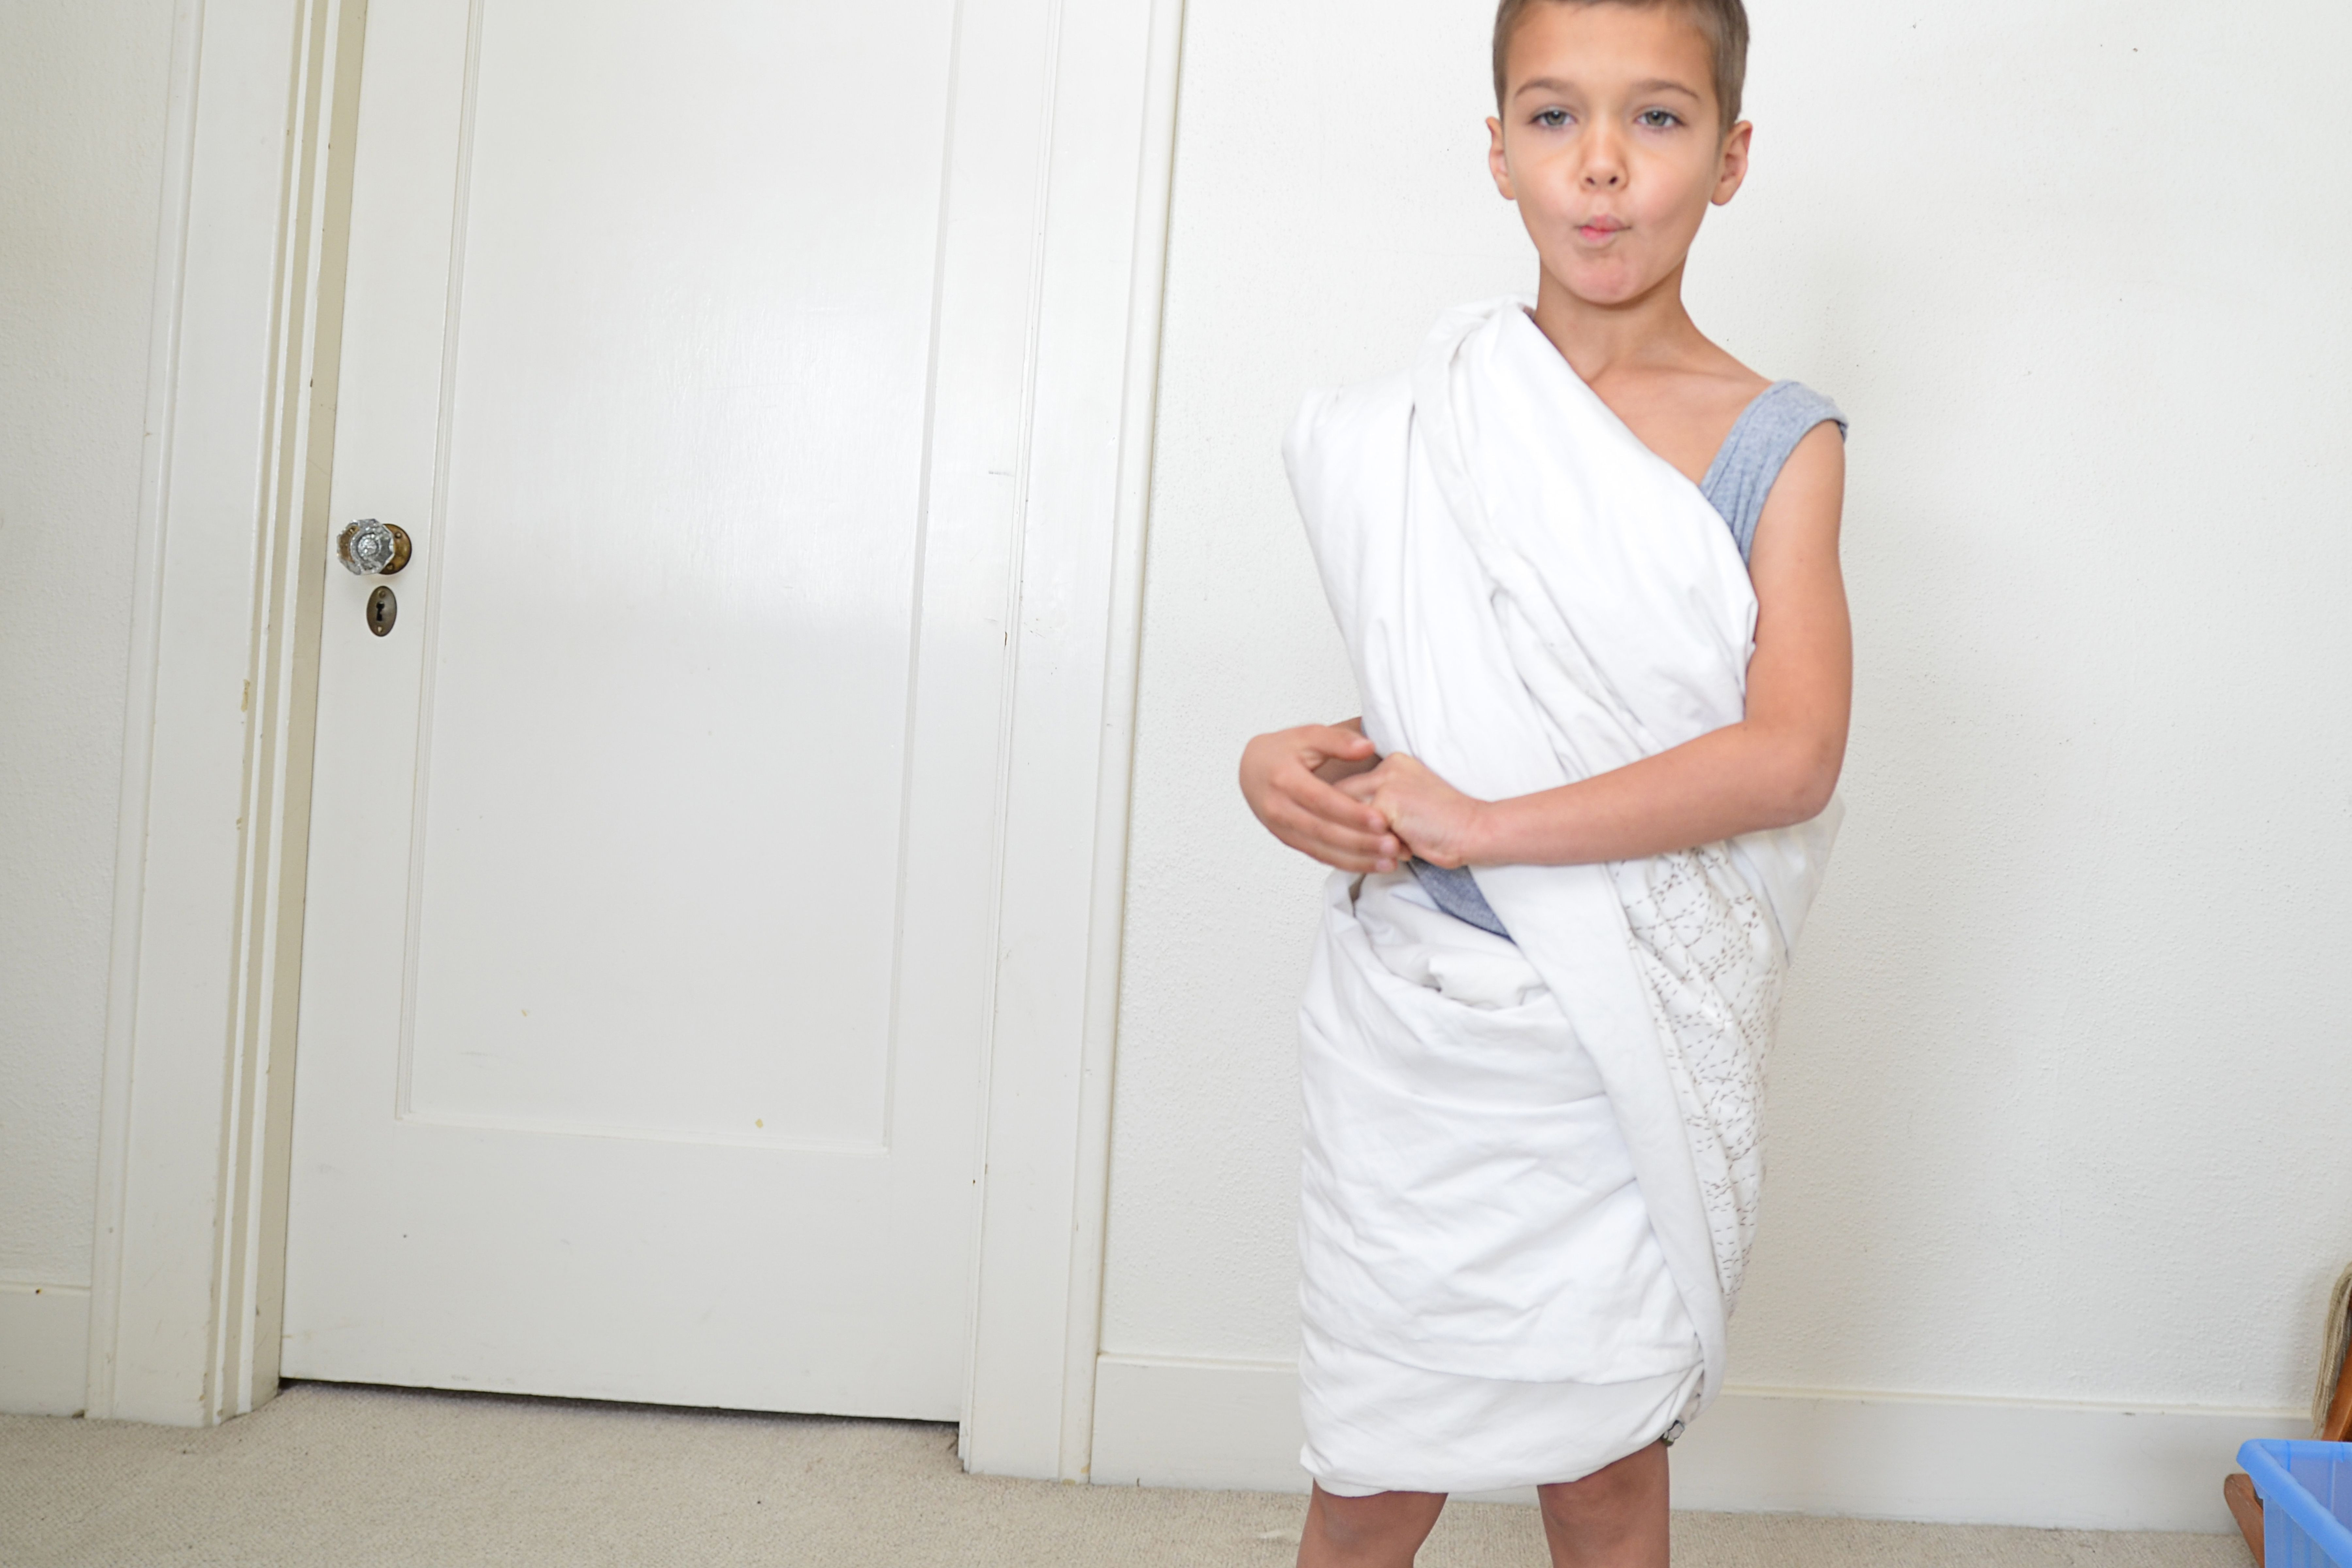 Toga Costume DIY
 How to Make a Toga Costume for a Kids Play